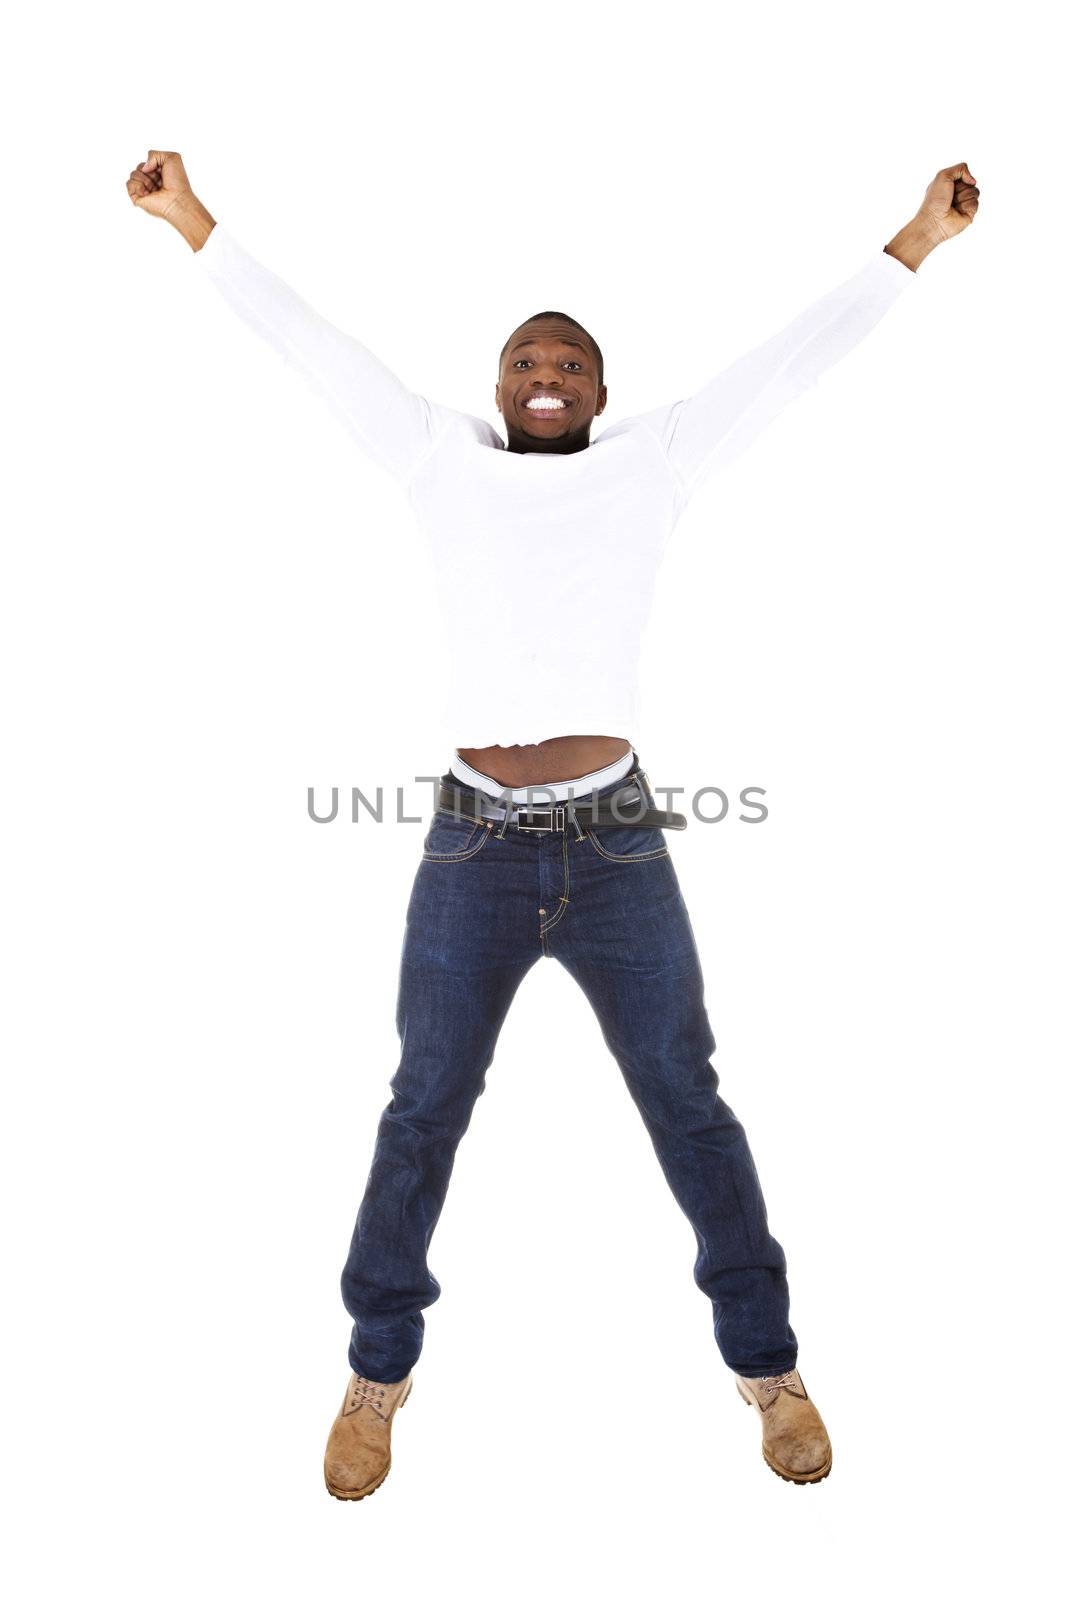 Young happy afro american man jumps in joy over white background.